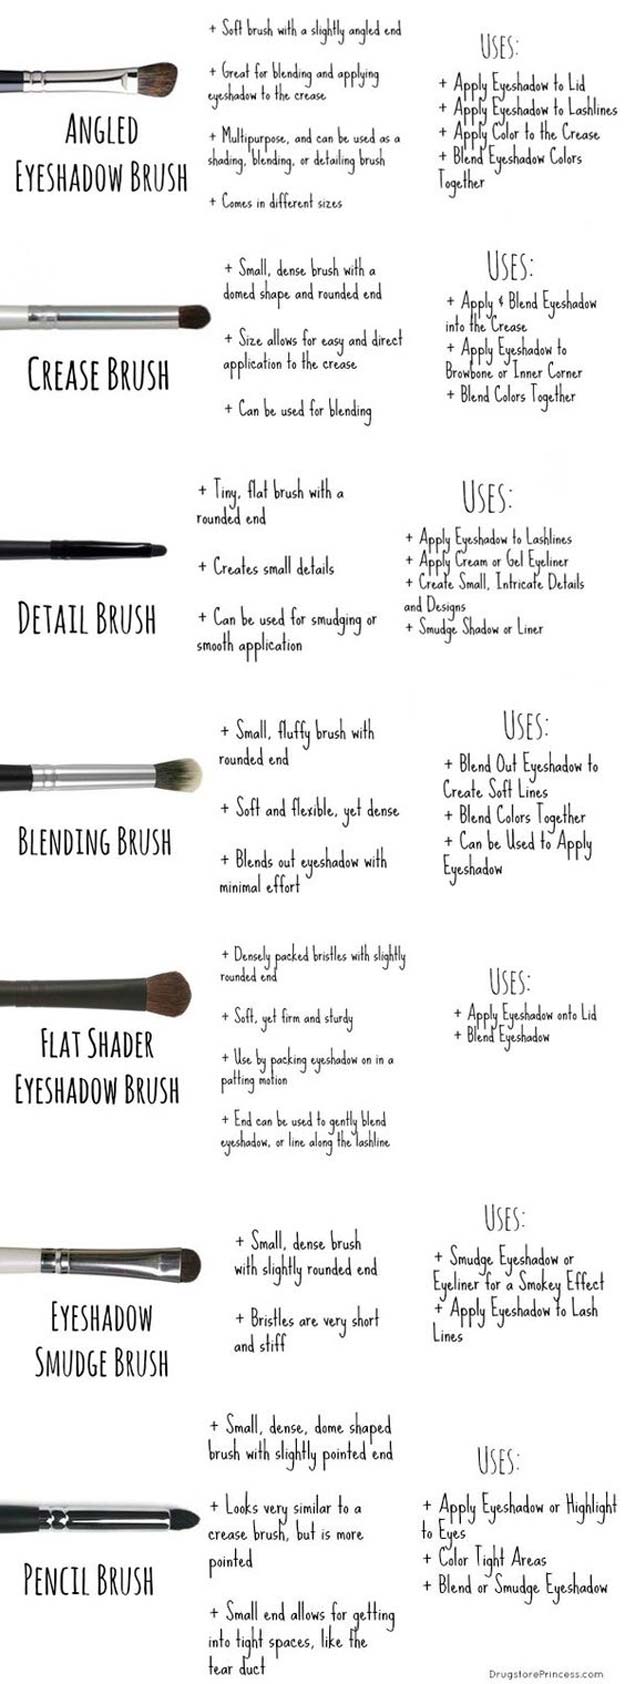 Best Eyeshadow Tutorials - Eyeshadow Brush Guide - Easy Step by Step How To For Eye Shadow - Cool Makeup Tricks and Eye Makeup Tutorial With Instructions - Quick Ways to Do Smoky Eye, Natural Makeup, Looks for Day and Evening, Brown and Blue Eyes - Cool Ideas for Beginners and Teens